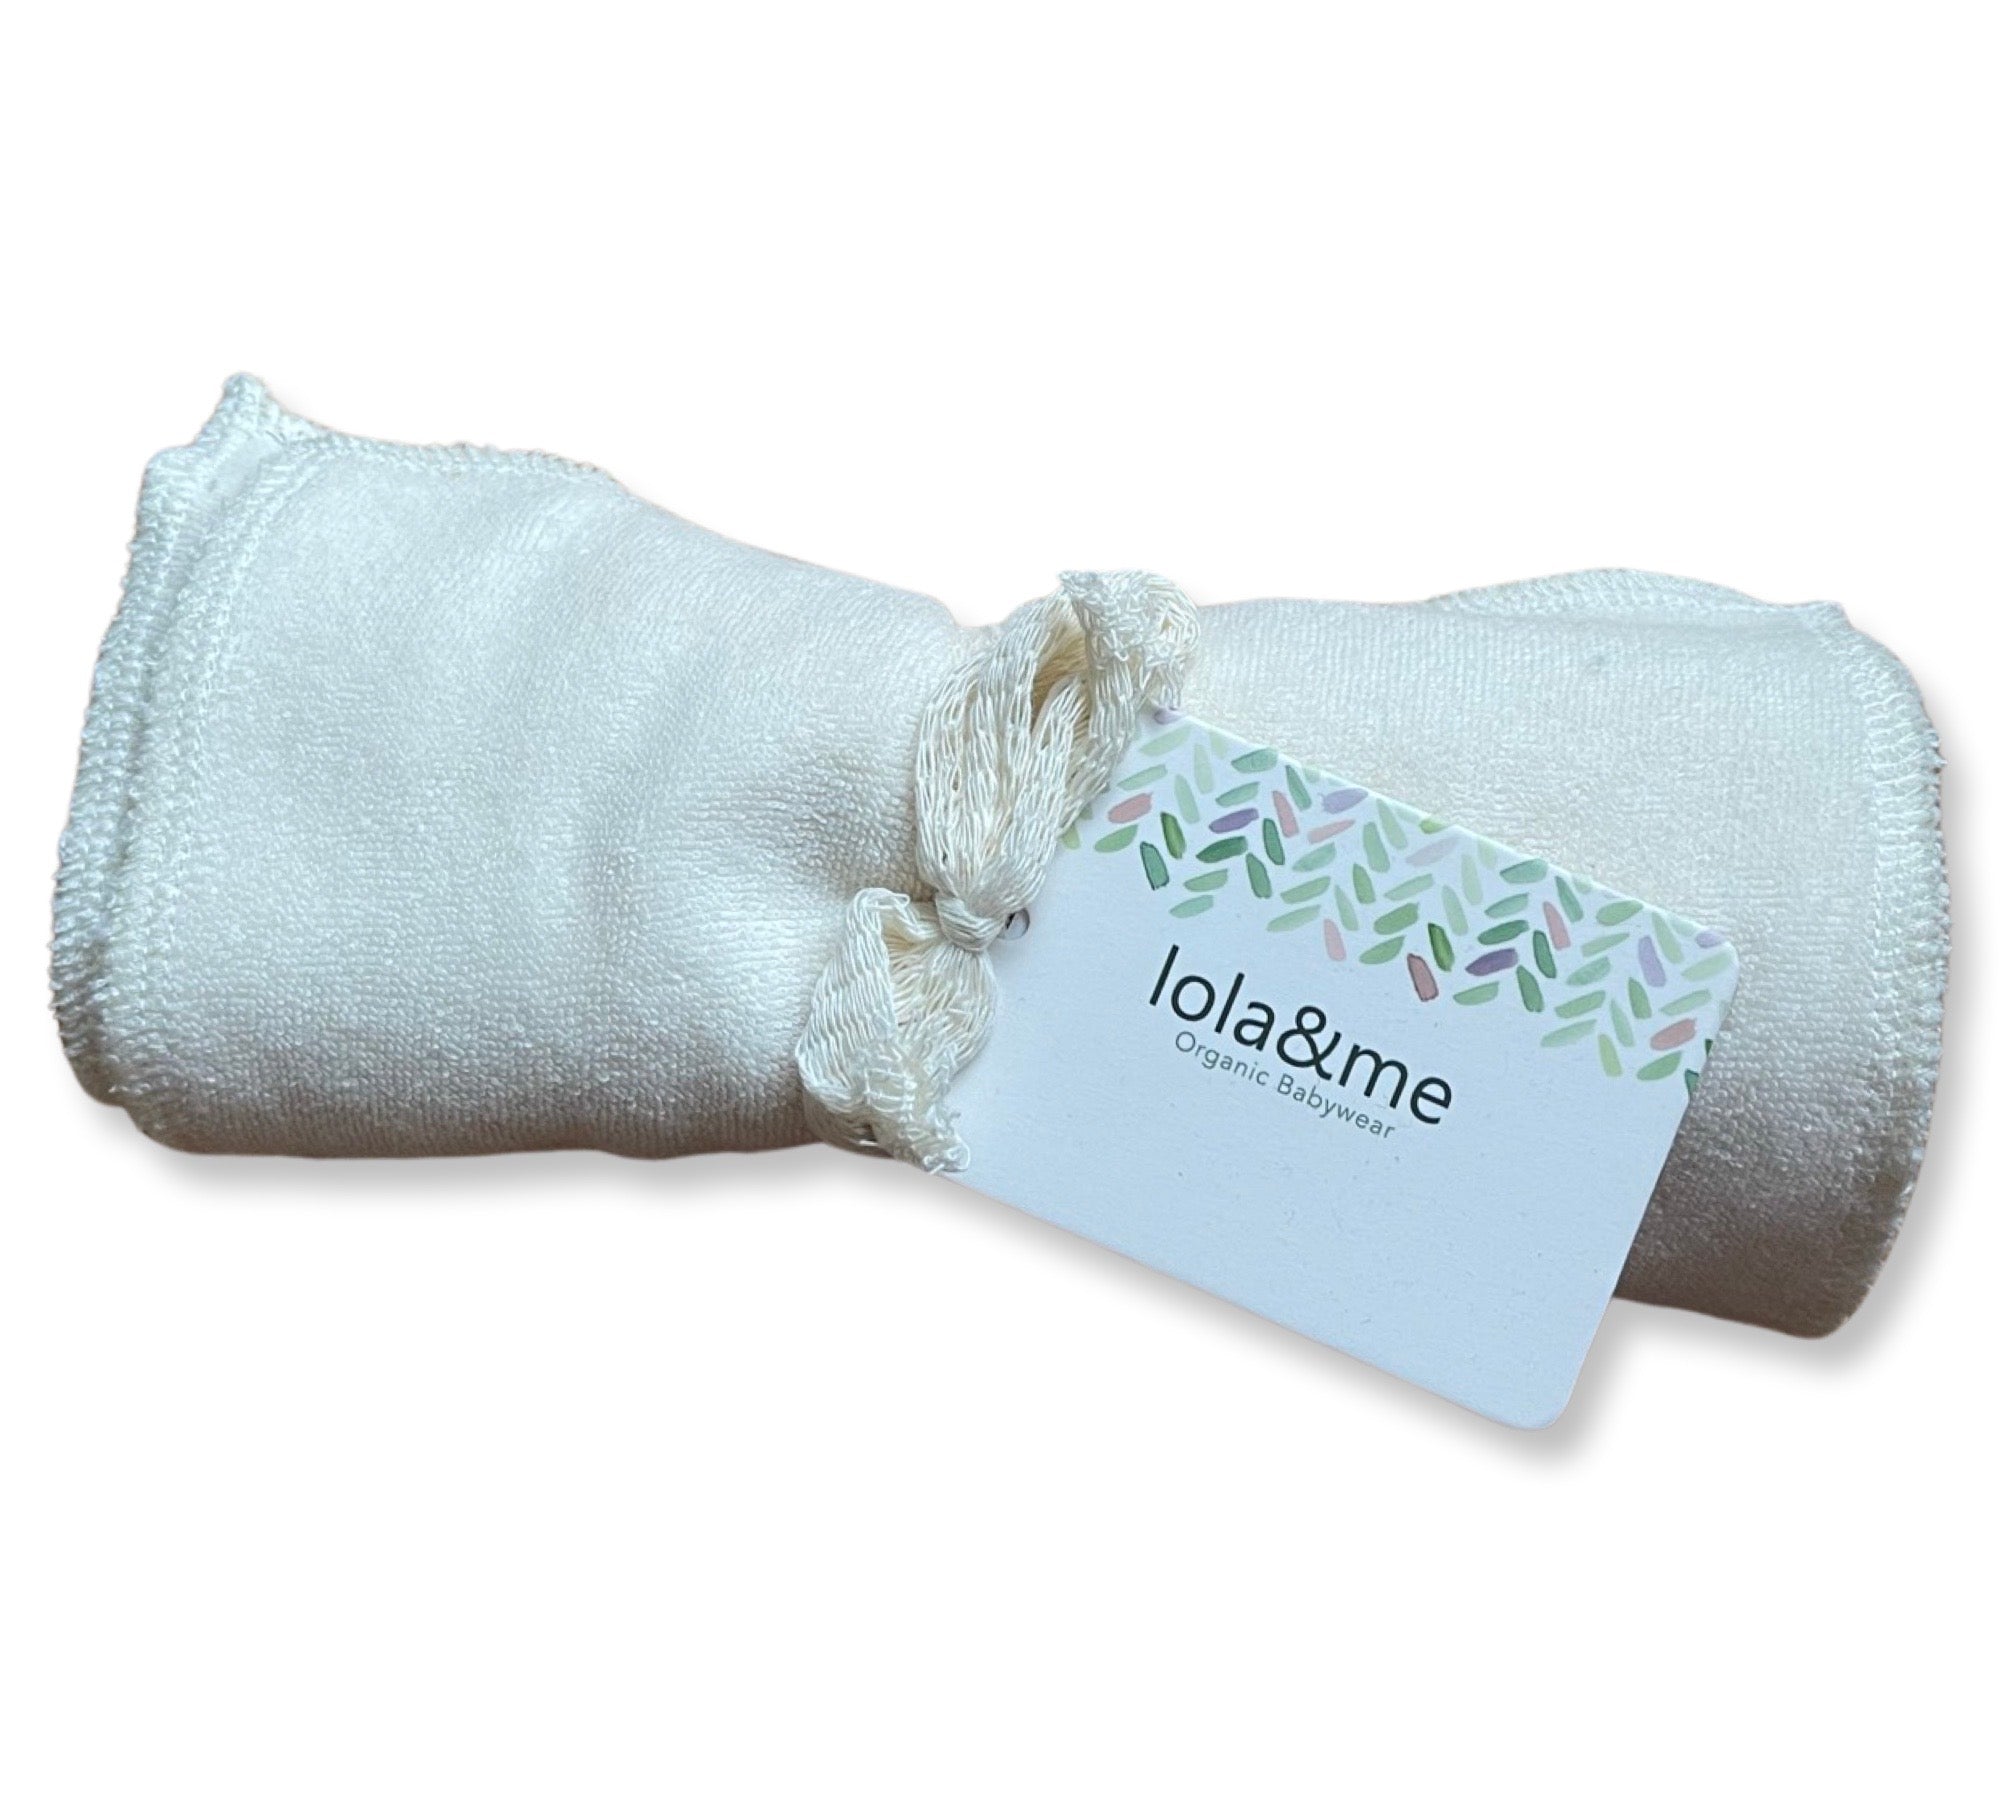 A rolled-up organic bamboo towel secured with a knotted rope and an attached brand label reading "giftbox co. organic bamboo," ideal for a New Arrival giftbox.